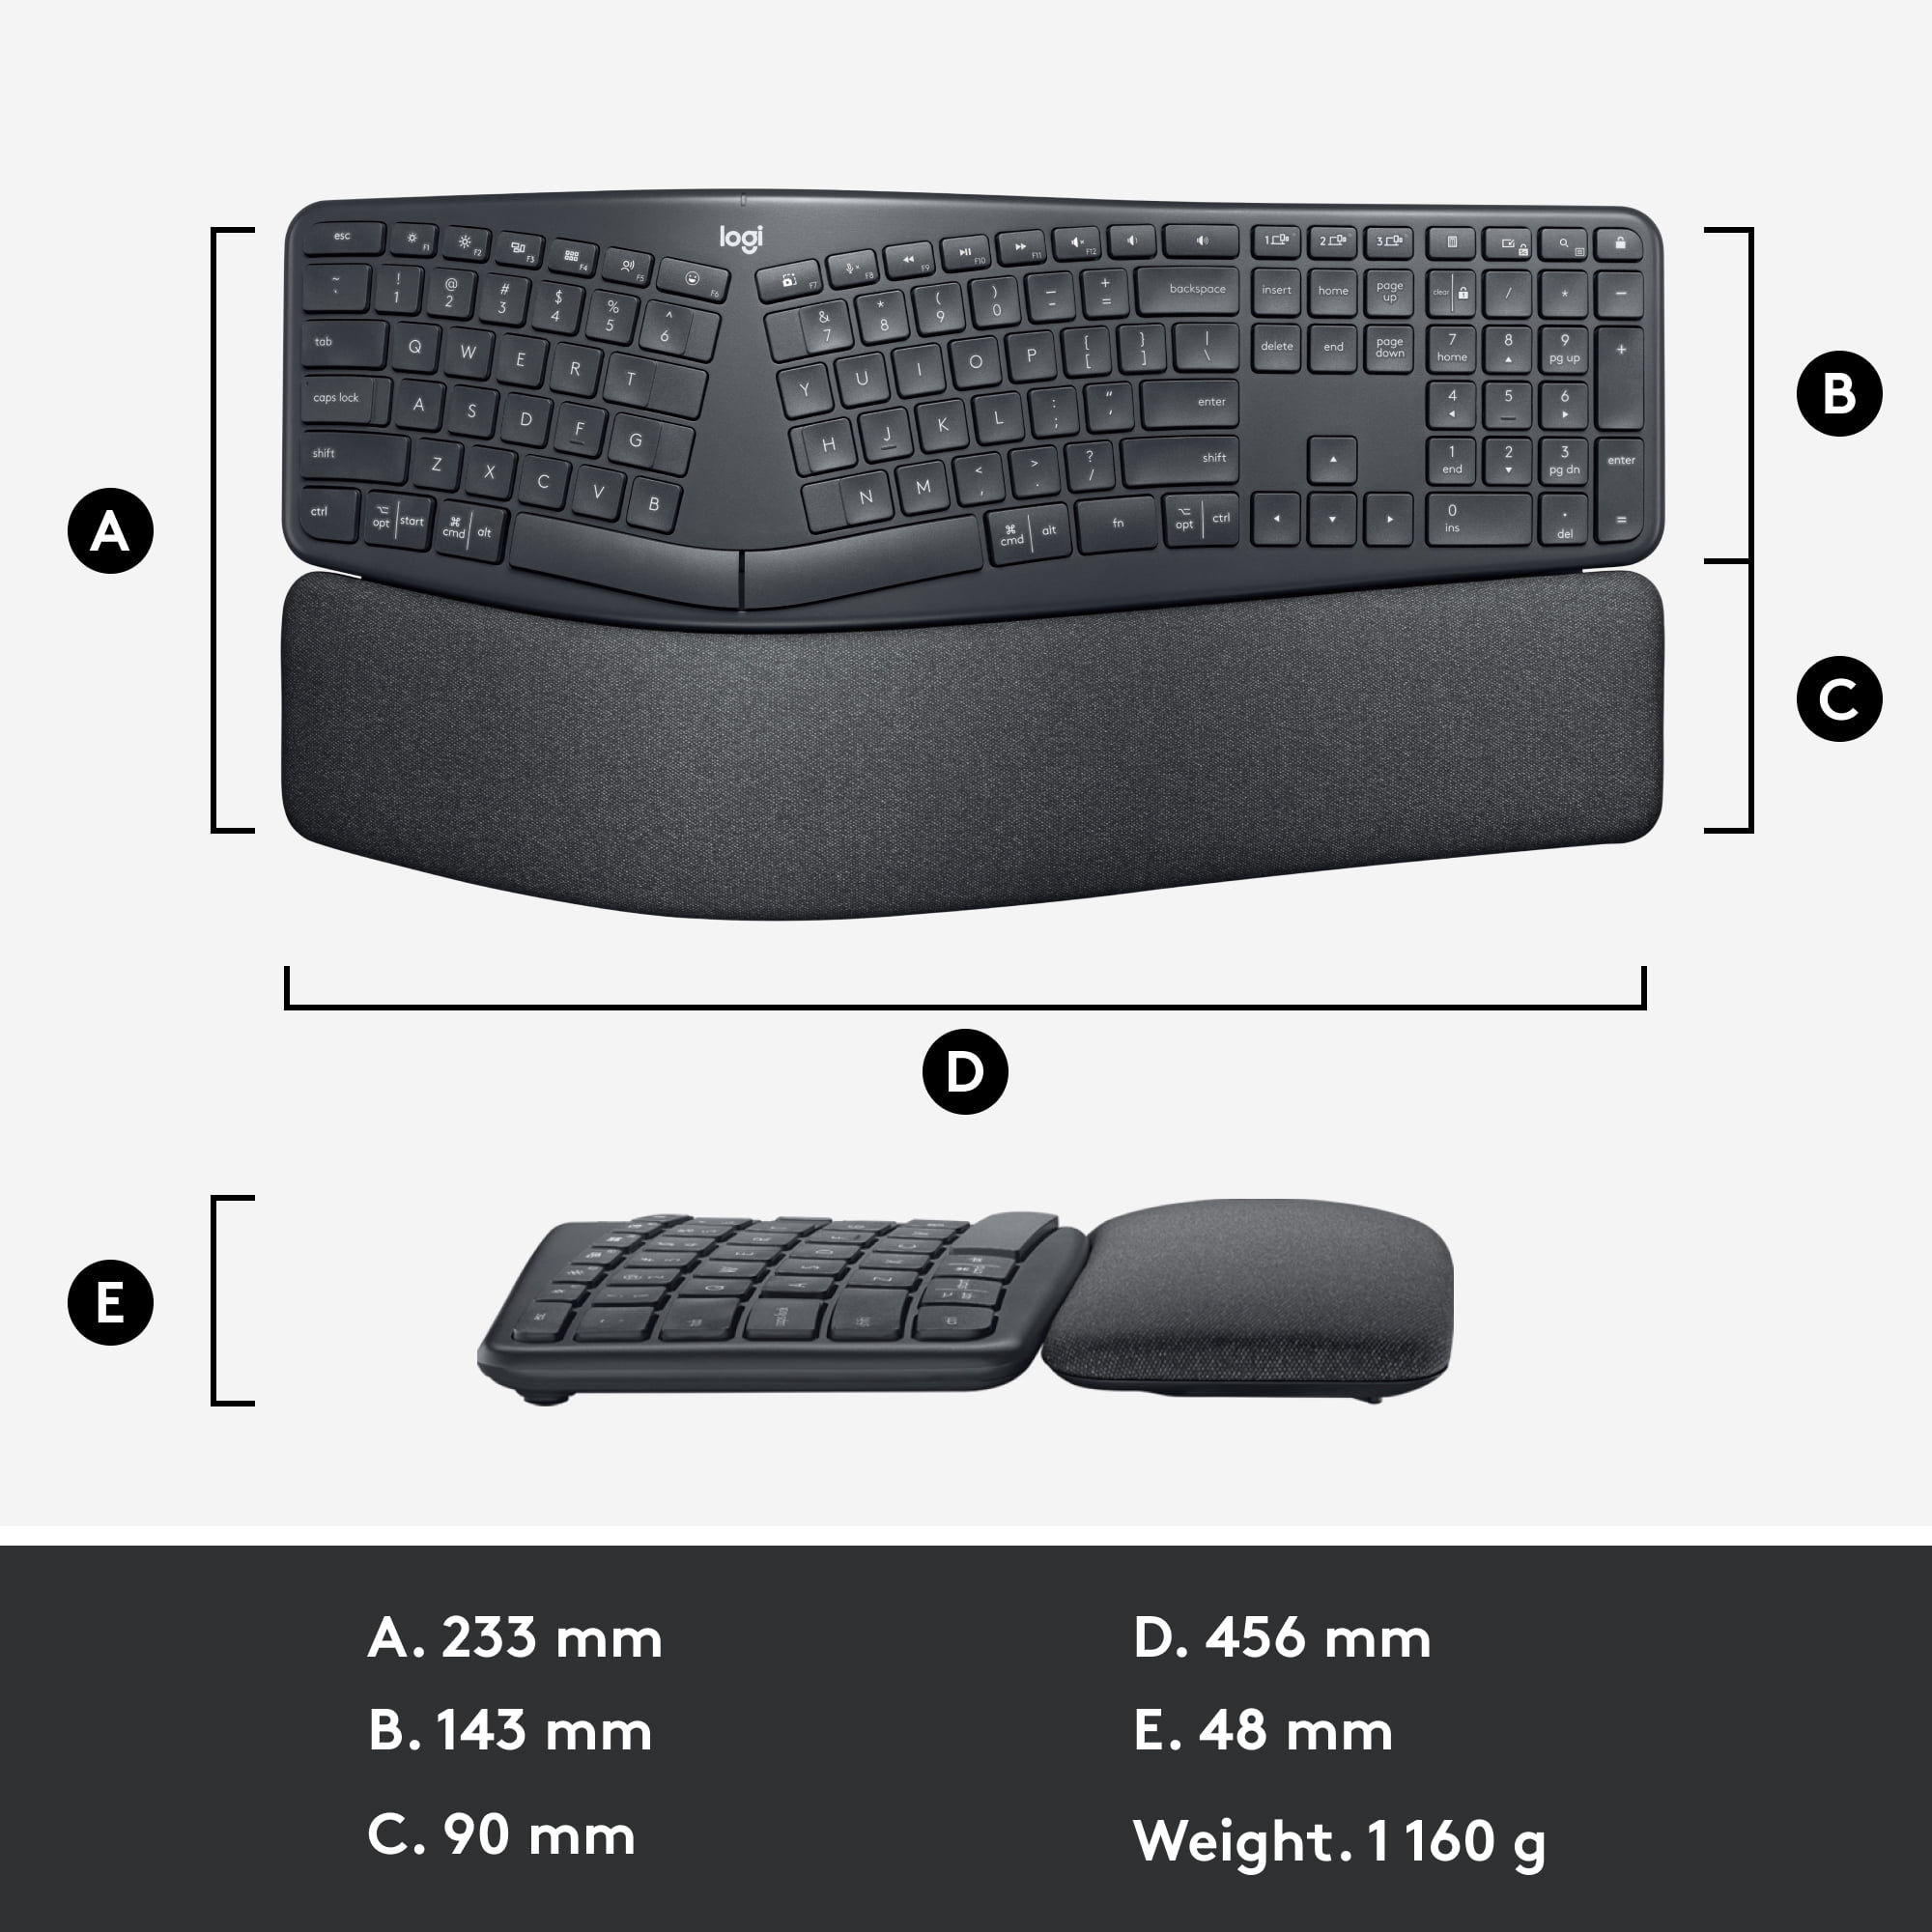 Logitech ERGO Series K860 Wireless Ergonomic Keyboard - Split Keyboard,  Wrist Rest, Natural Typing, Stain-Resistant Fabric, Bluetooth and USB  Connectivity, Compatible with Windows/Mac - Graphite